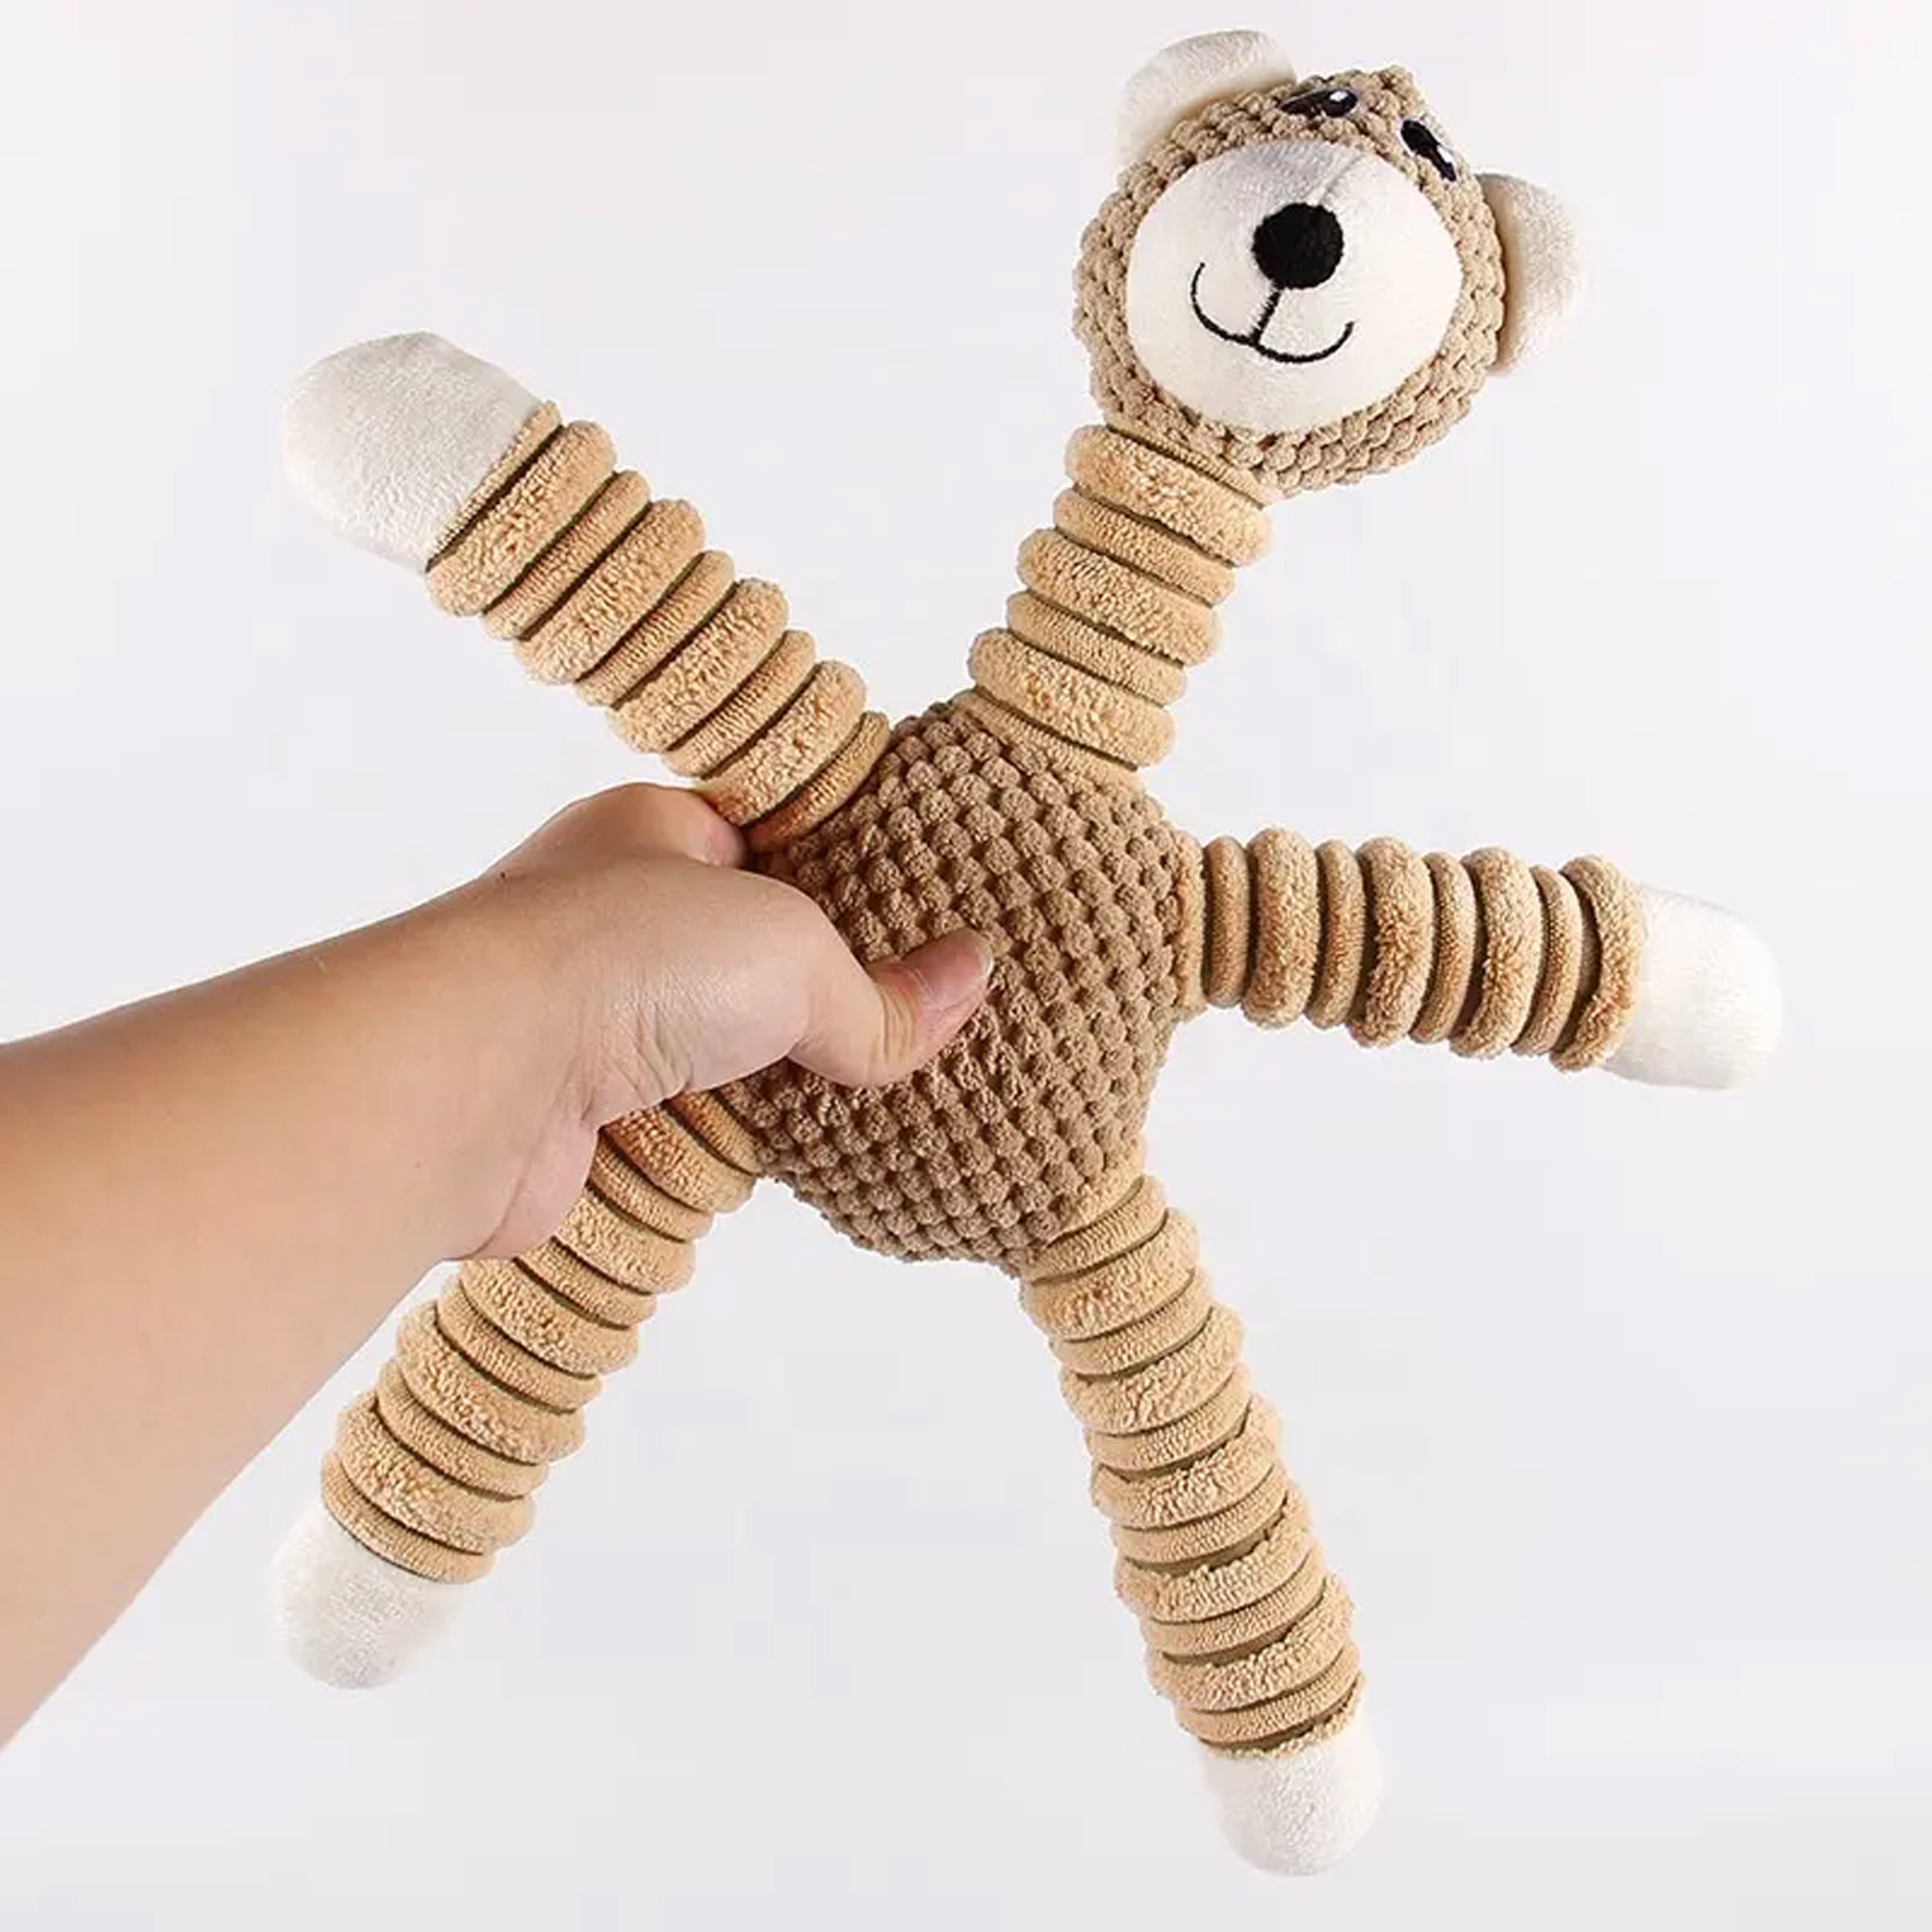 Engage Your Pet with Plush Stuffed Animal Interactive Pet Toys